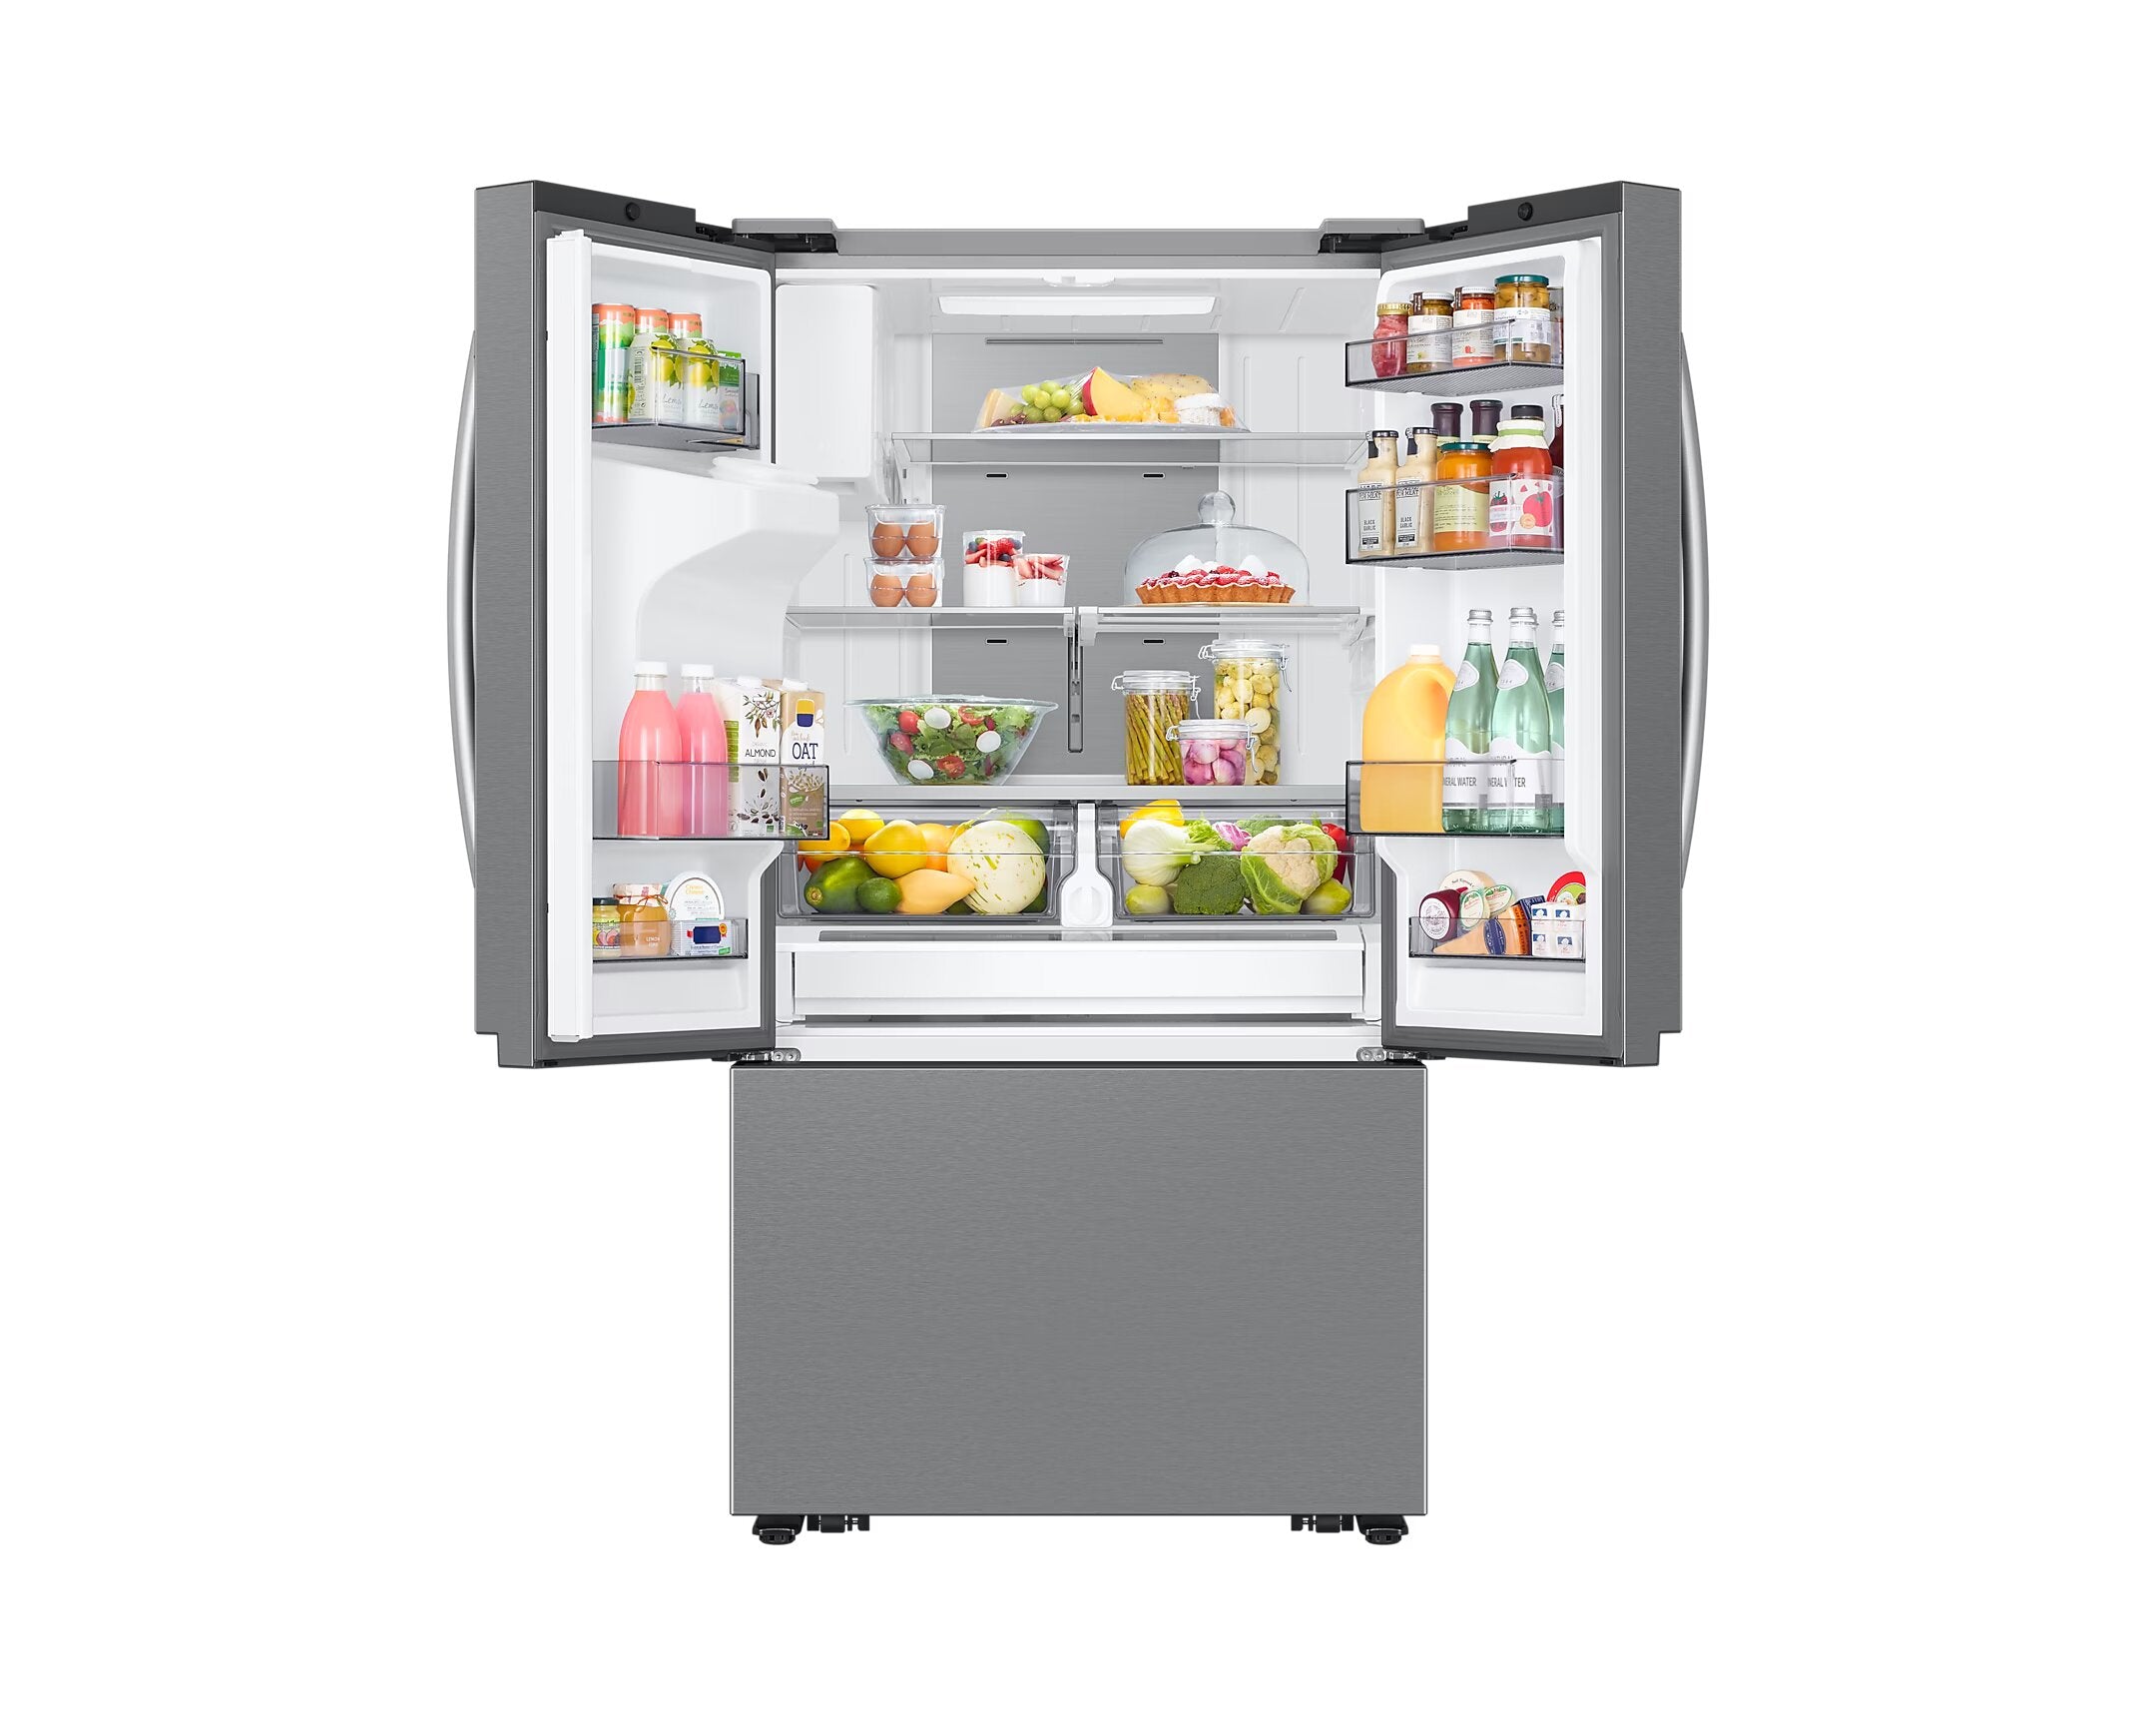 Samsung - 36 Inch 25.5 cu. ft French Door Refrigerator in Stainless - RF27CG5400SRAA